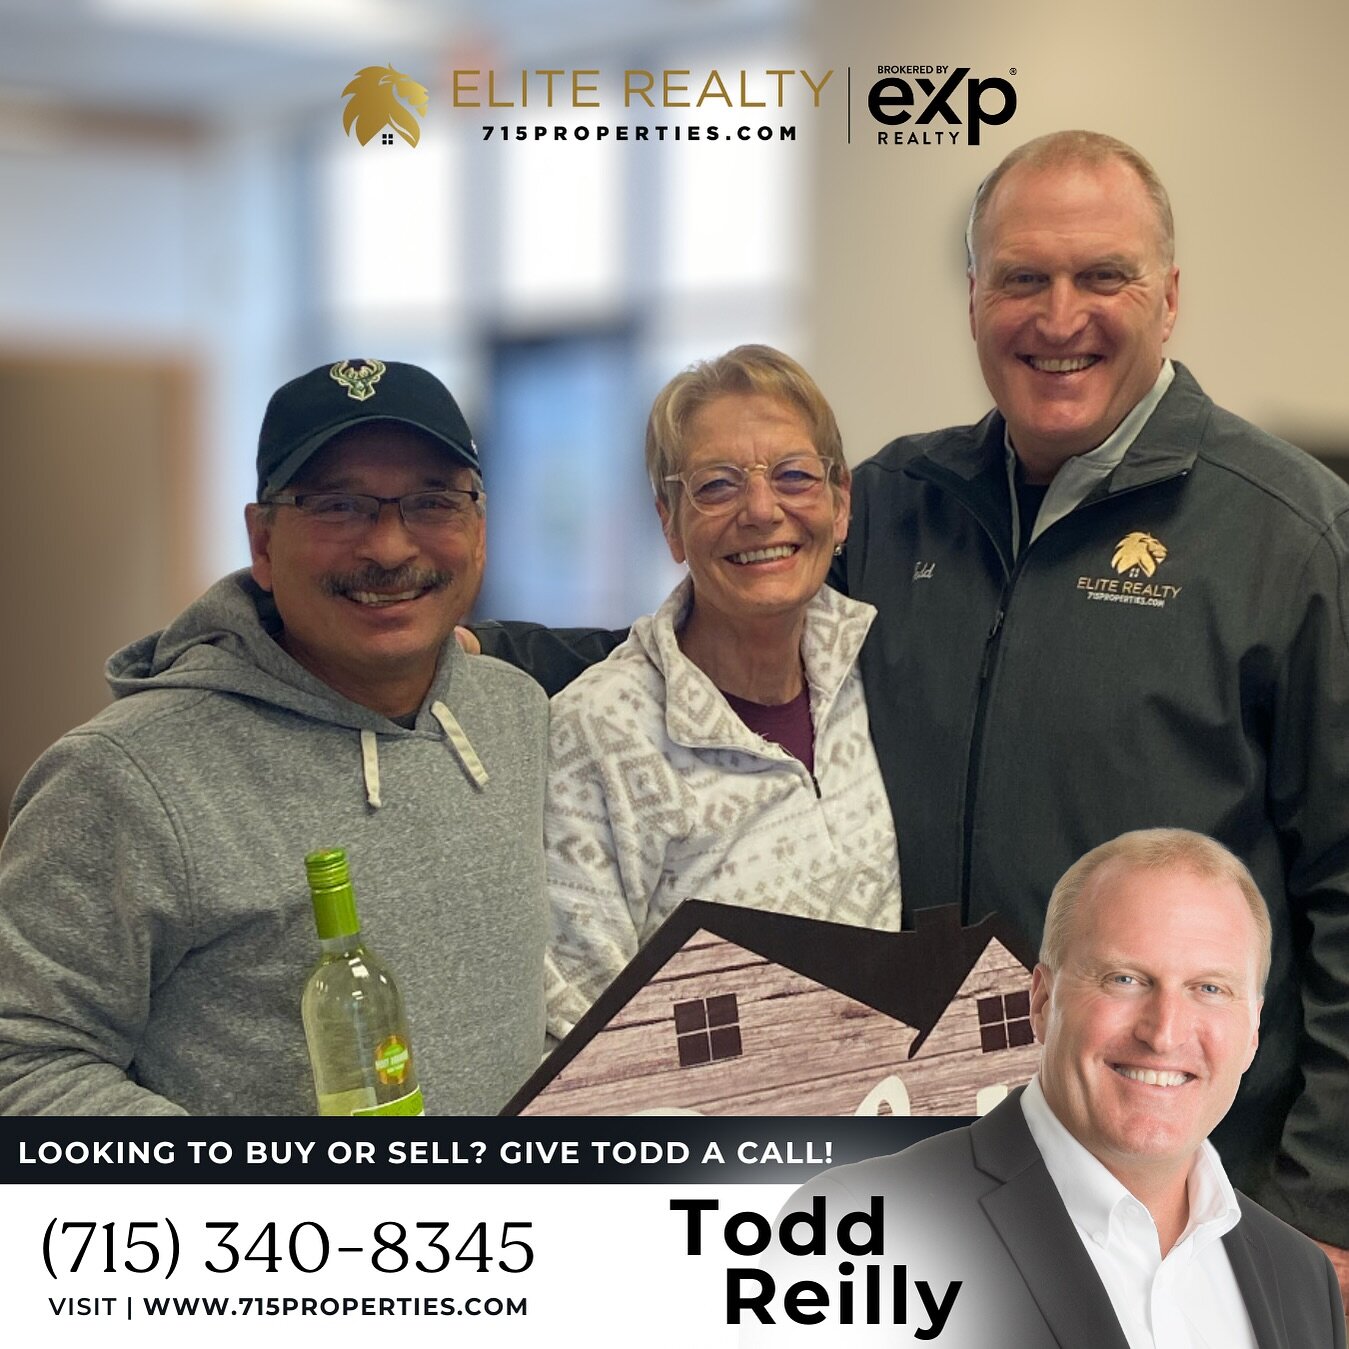 Congrats to Tony and Pam &amp; thanks for trusting the Elite Realty Team! Are you considering buying or selling?📱 Call Todd (715) 340-8345 #EliteRealtyTeam #Sold